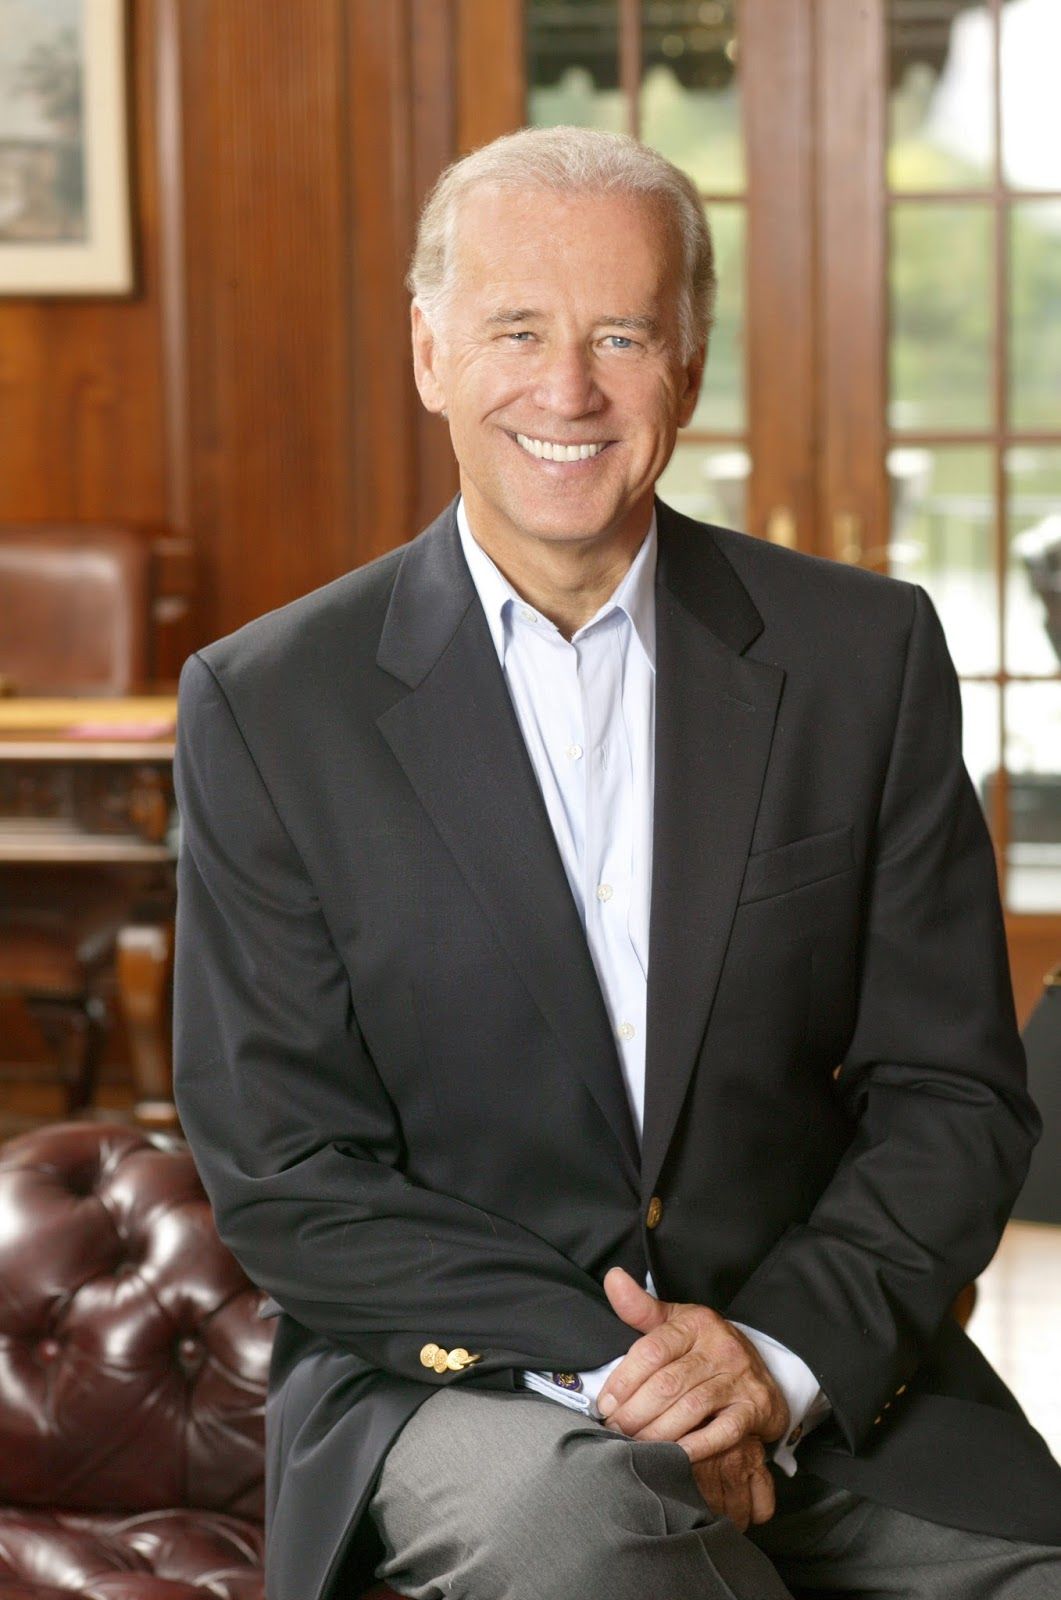 Joe Biden What you need to know about the 46th president  ABC News